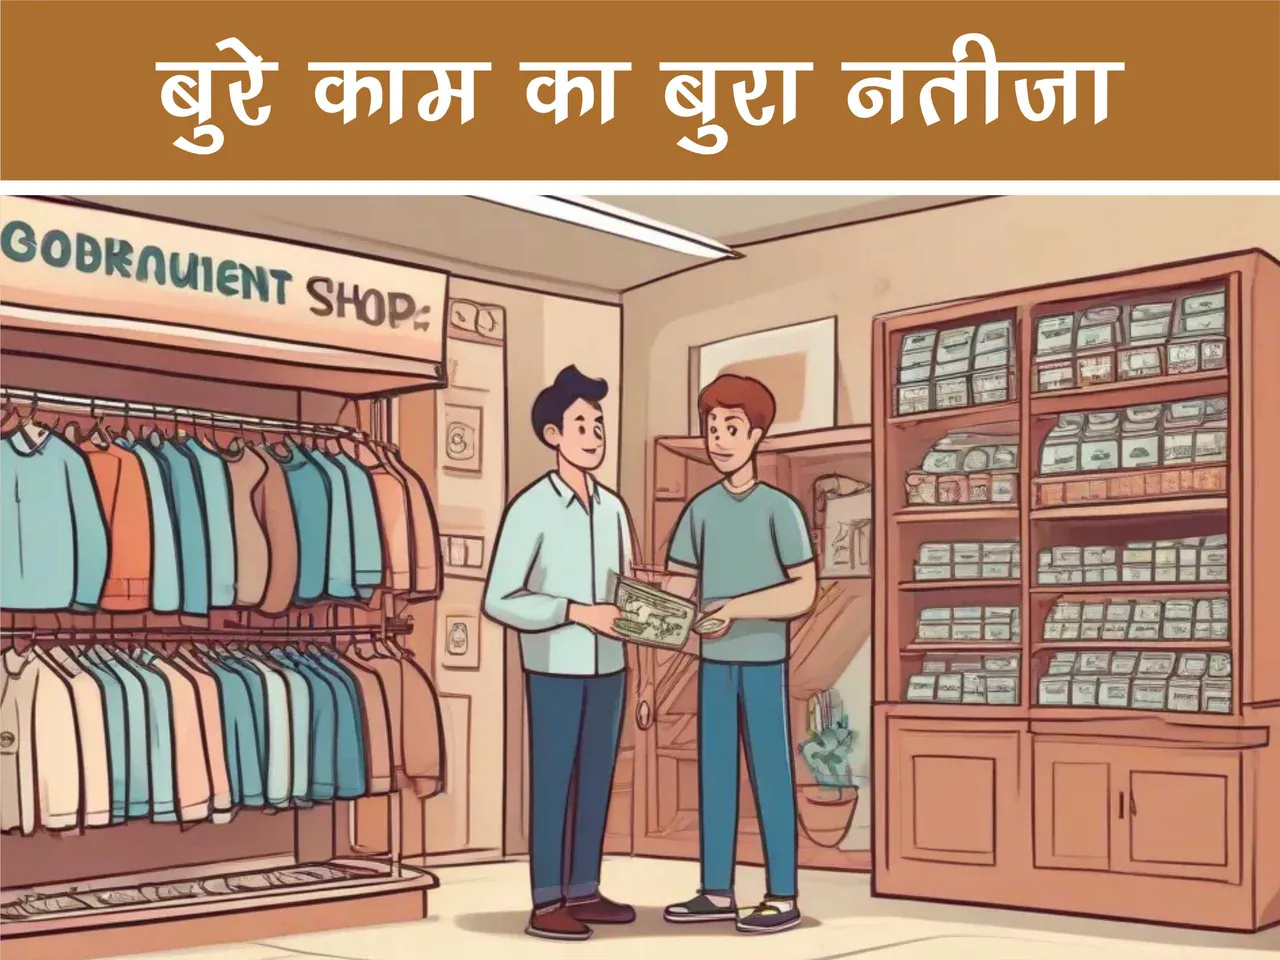 Father and son in garment shop cartoon image